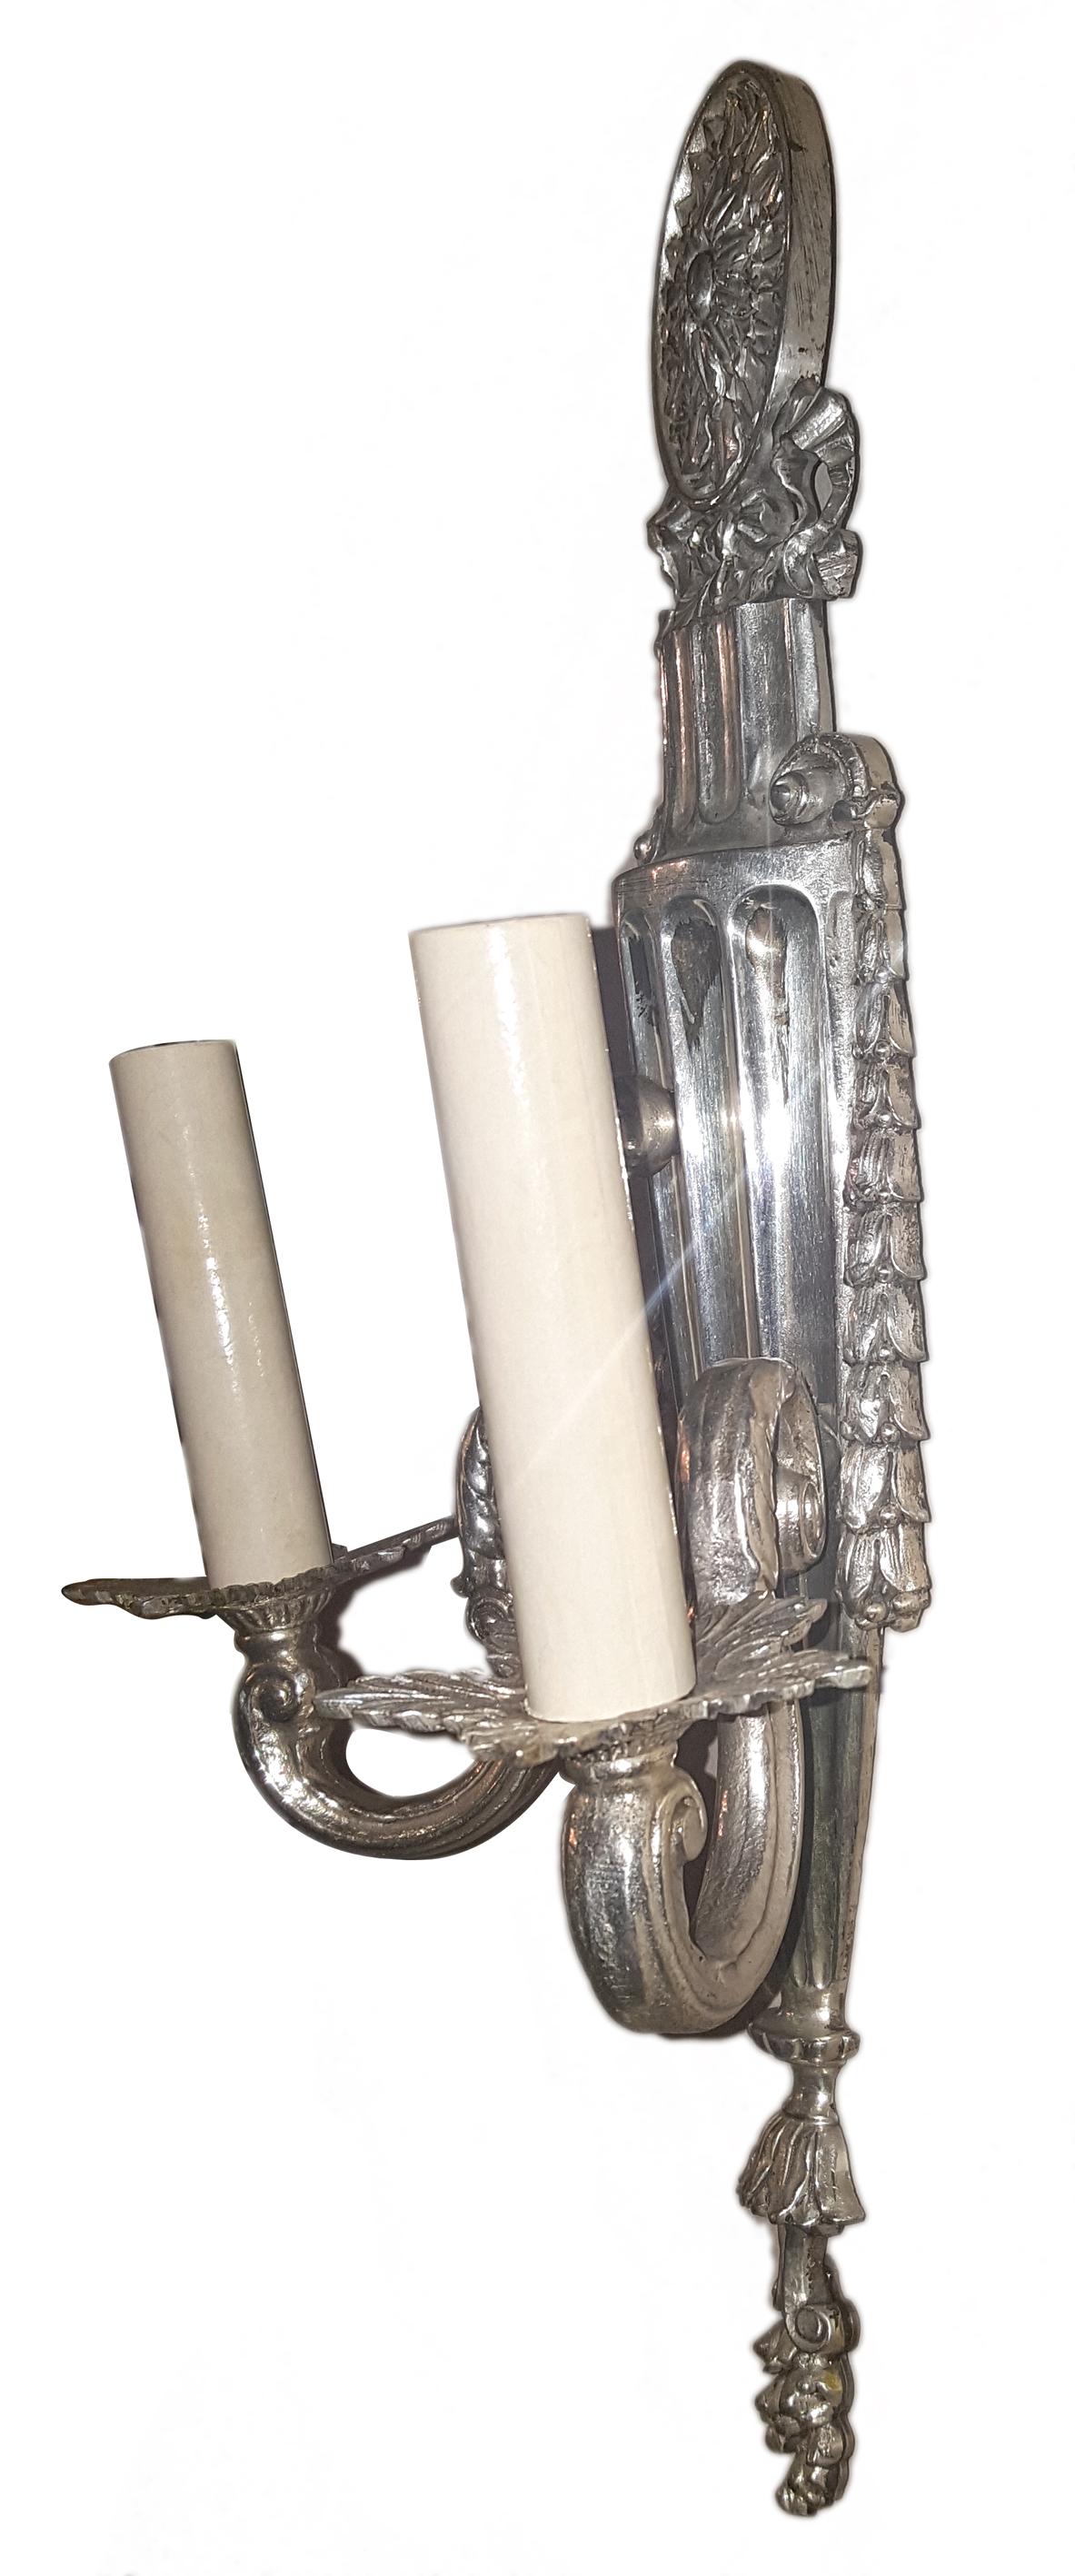 A set of four circa 1920s English silver plated neoclassic style sconces.
Measurements:
Height 17